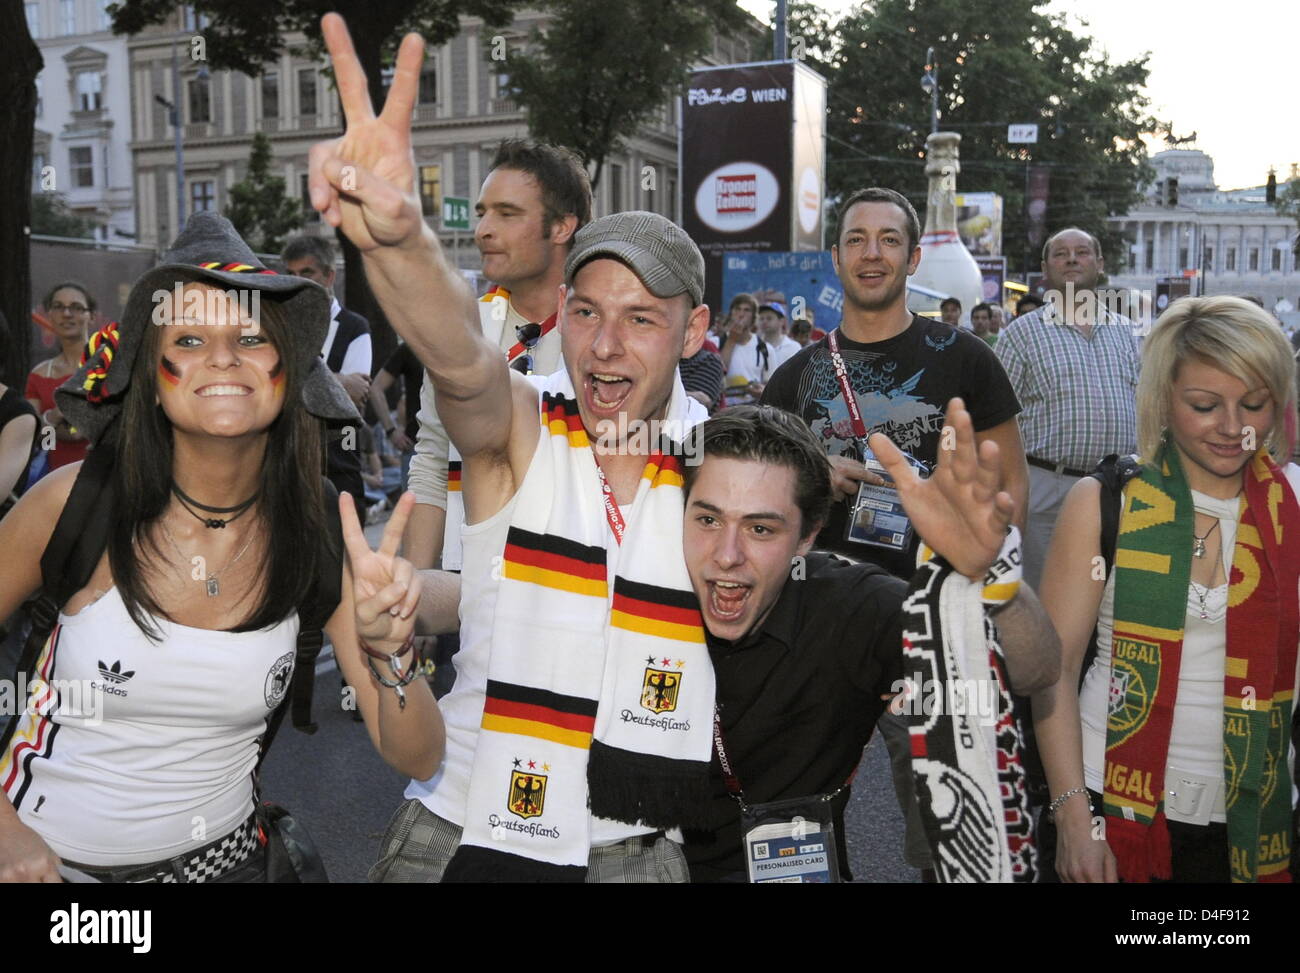 German supporters celebrating the 2-0-lead in the fanzone in Vienna, Austria on 19 June 2008, during the EURO 2008 quarter final match Portugal versus Germany. Photo: Achim Scheidemann dpa +++###dpa###+++ Stock Photo